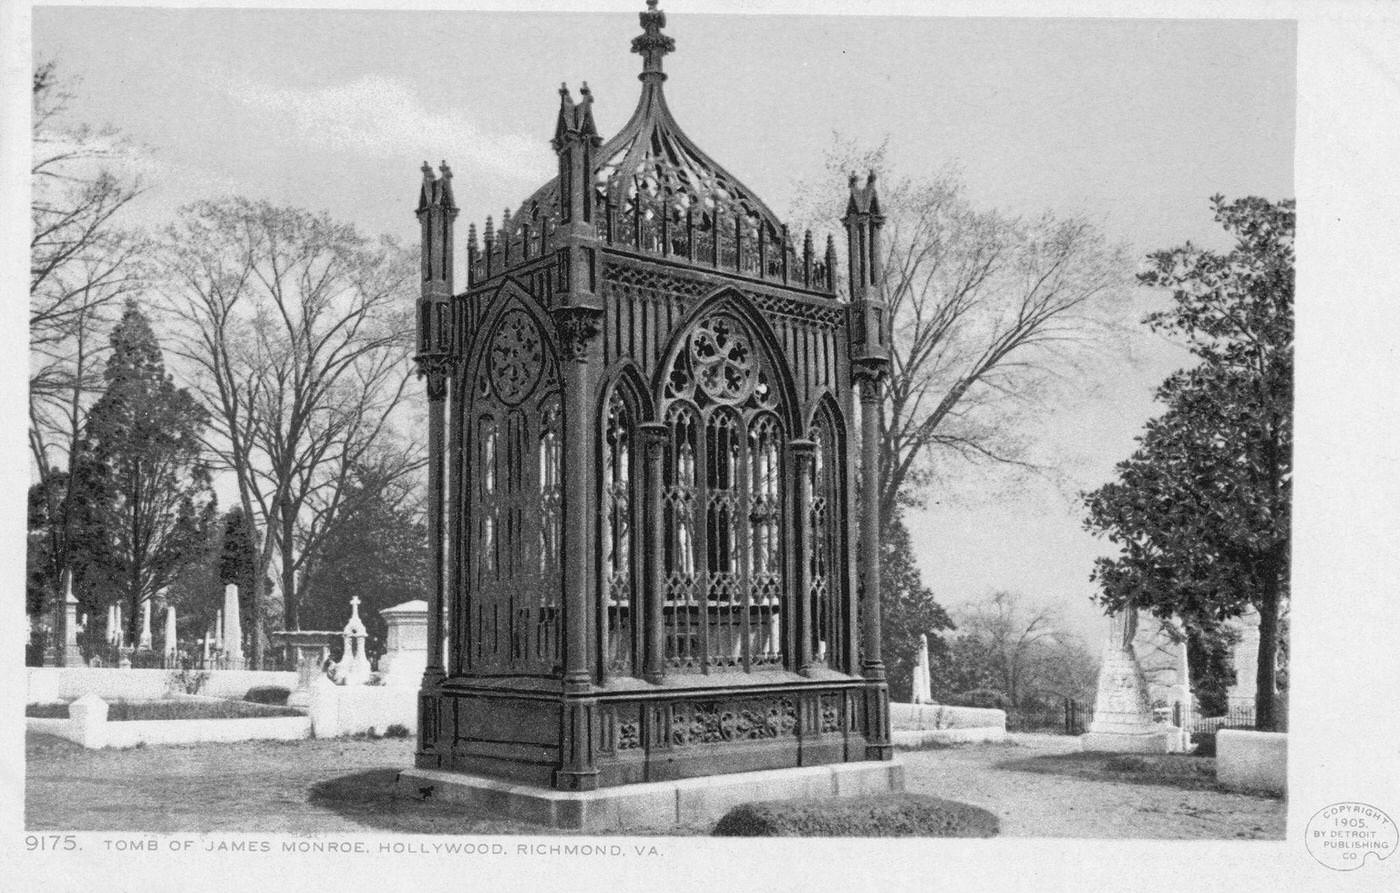 Tomb of James Monroe, declared a National Historic Landmark in 1971, Hollywood Cemetery, Richmond, Virginia, 1905.